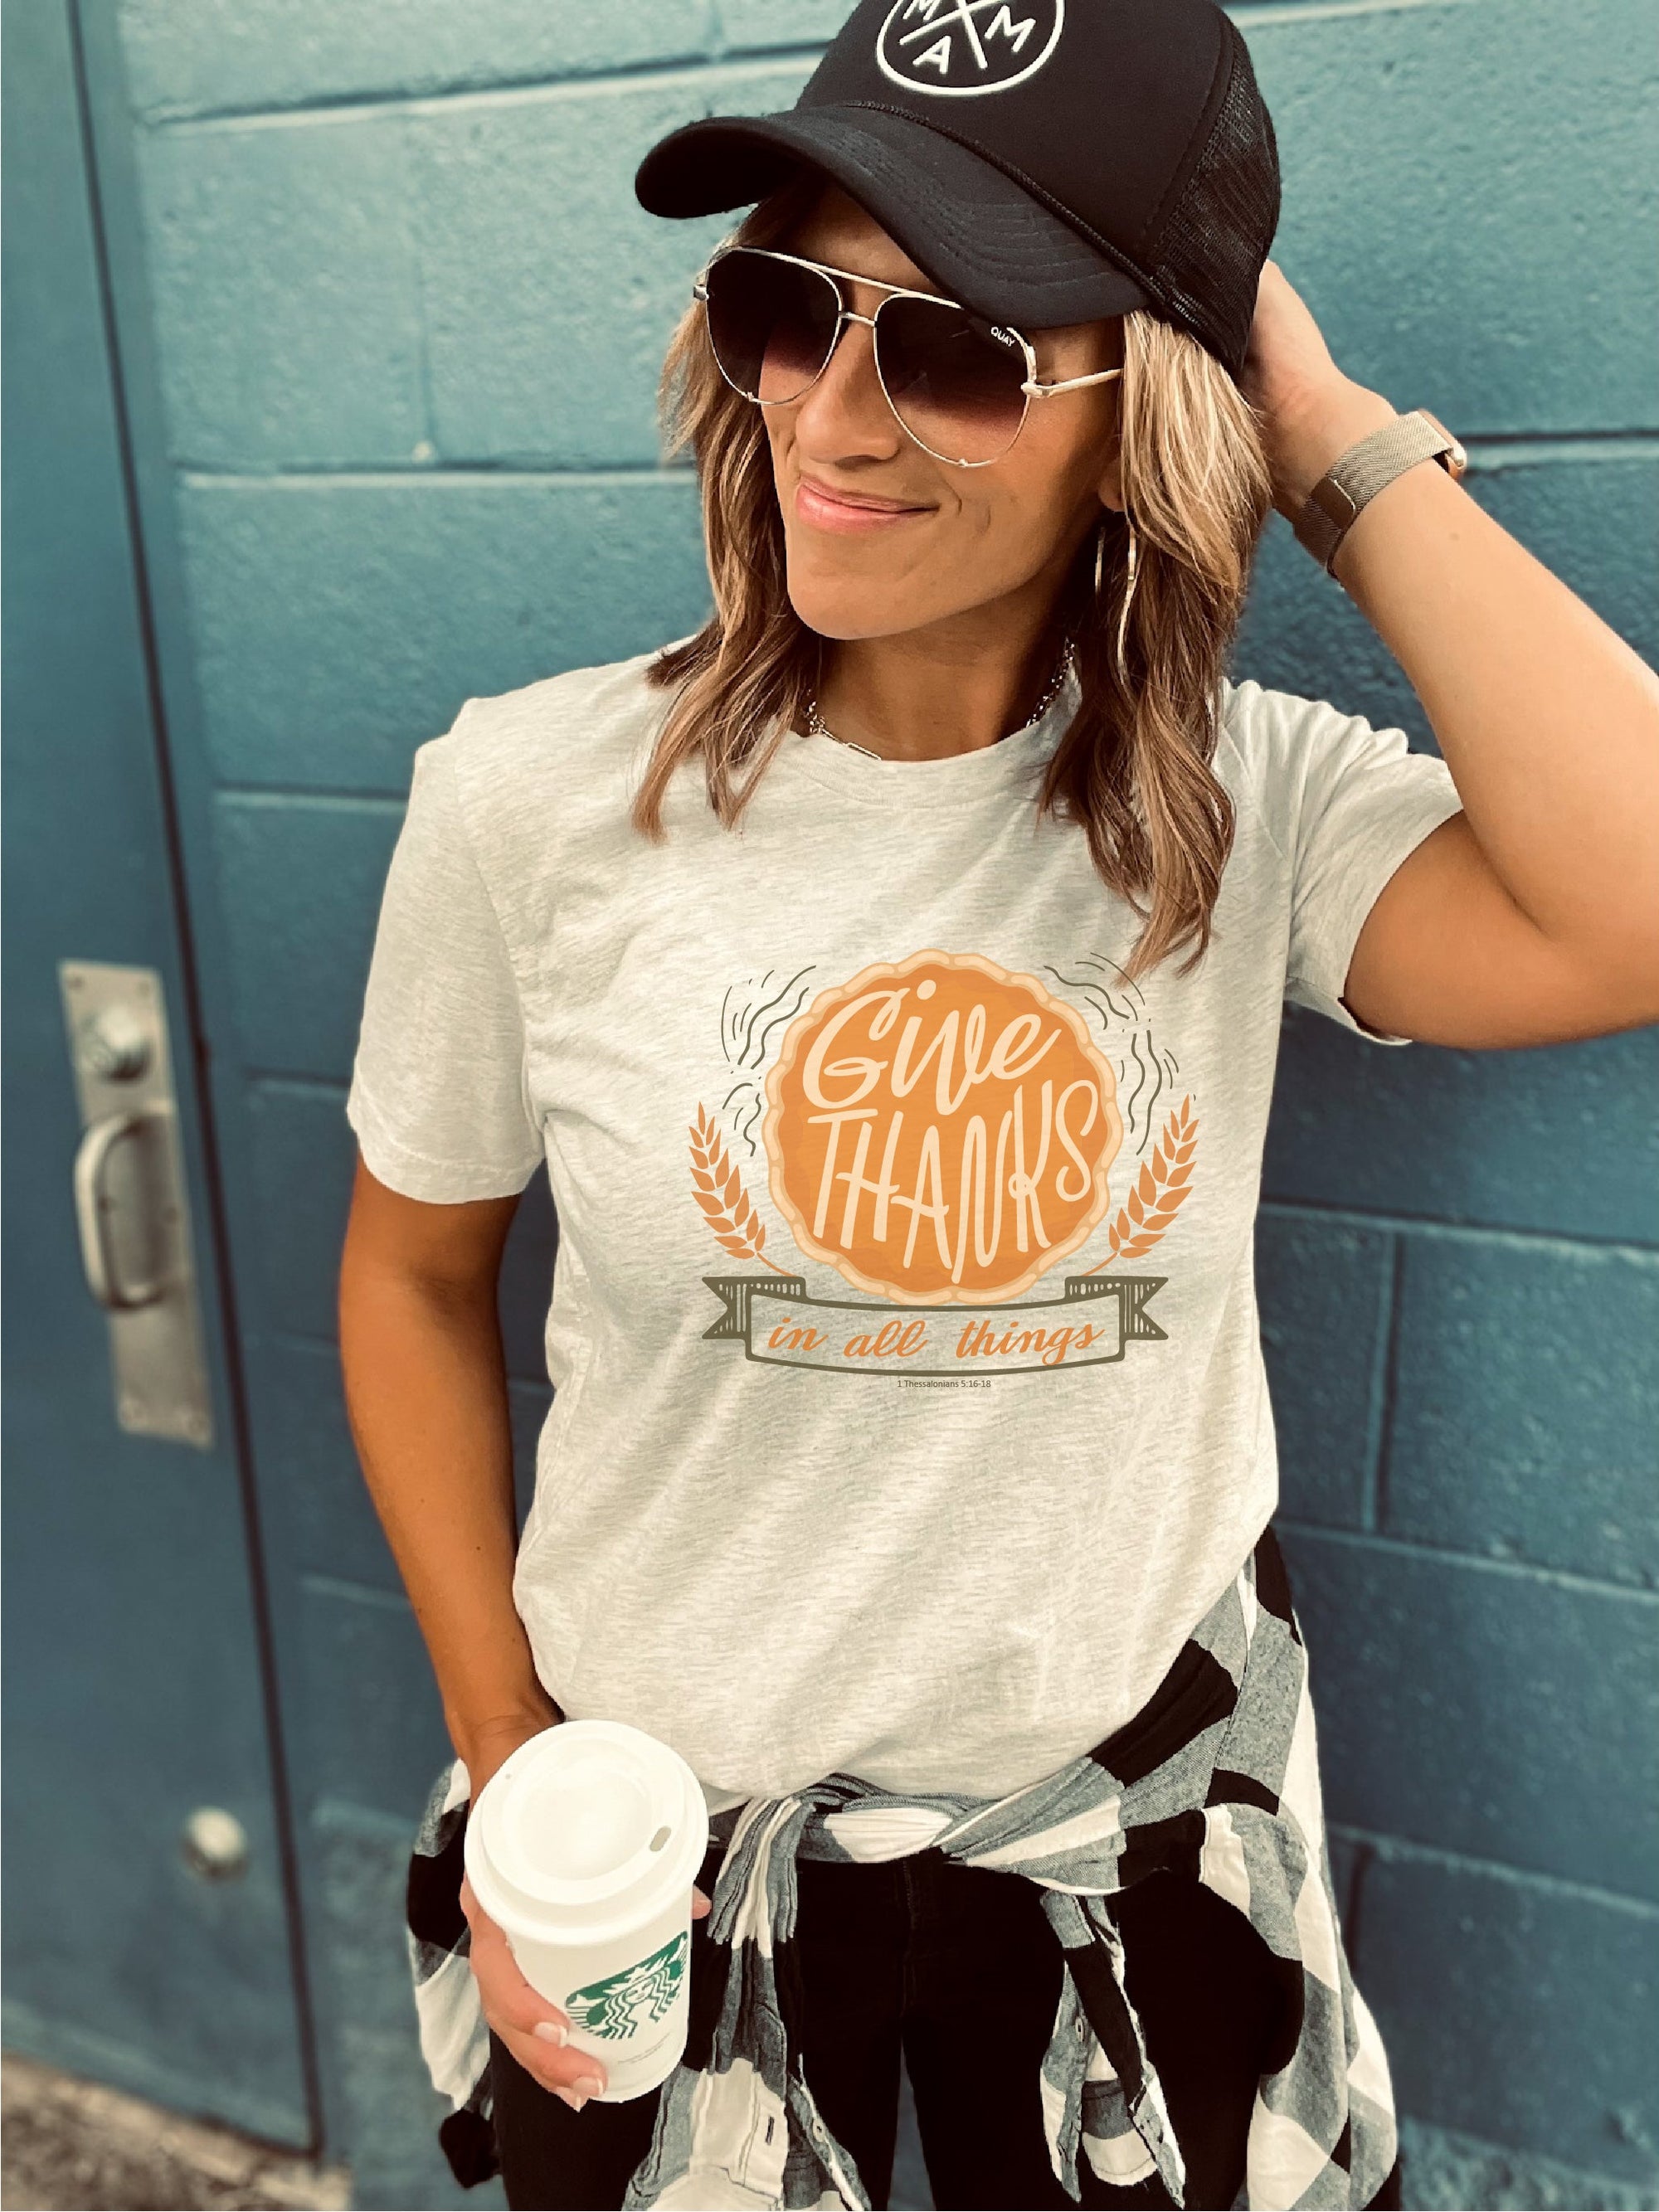 Give thanks in all things tee Short sleeve fall tee Bella Canvas 3001 heather oatmeal 